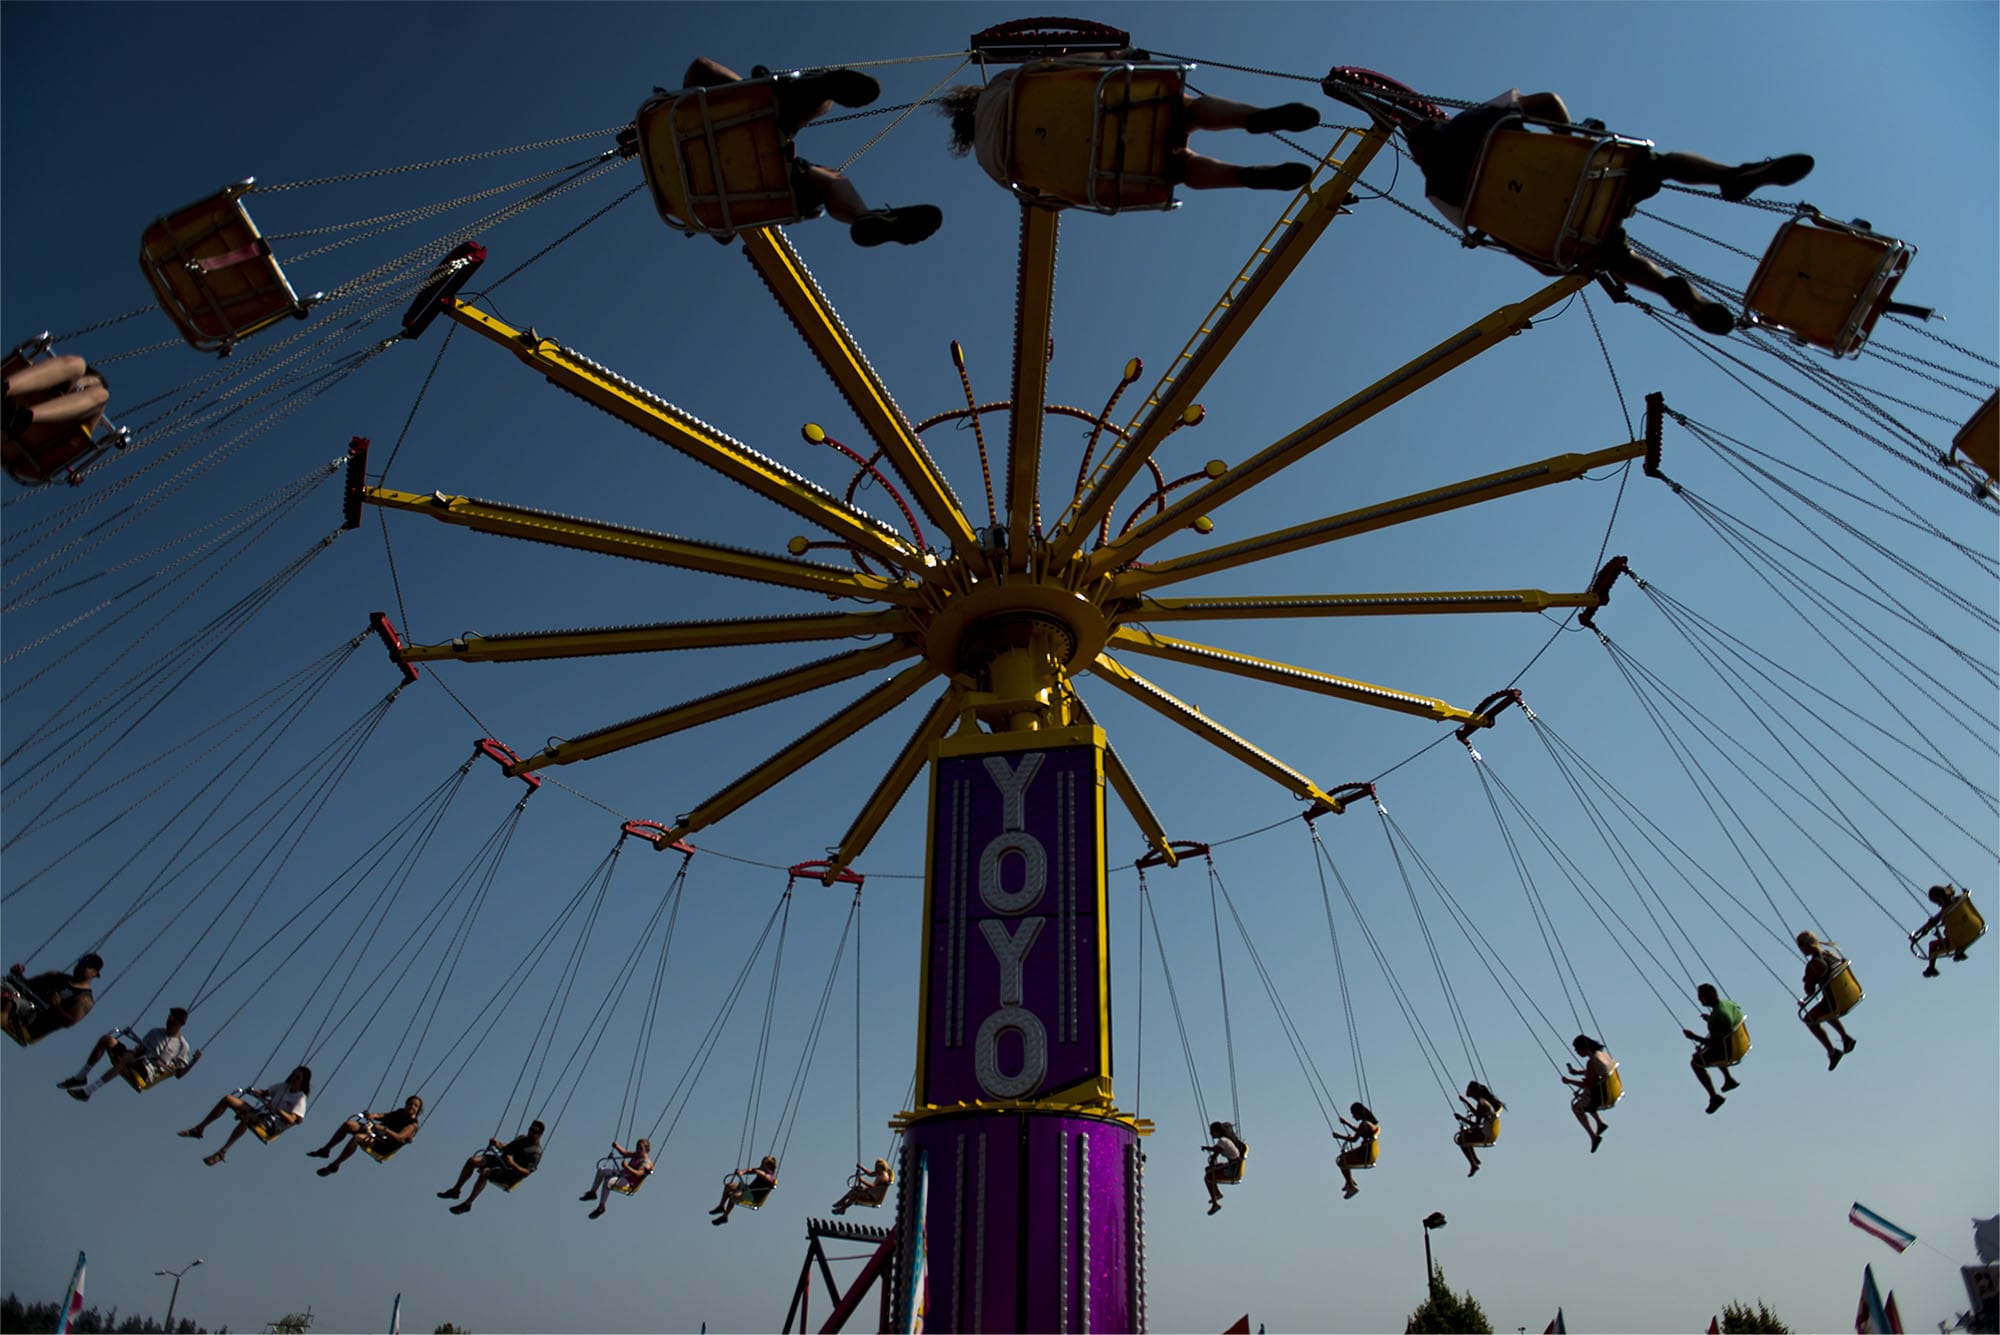 Attendees at the Clark County Fair ride the Yoyo swing ride on Tuesday afternoon, Aug. 7, 2018.